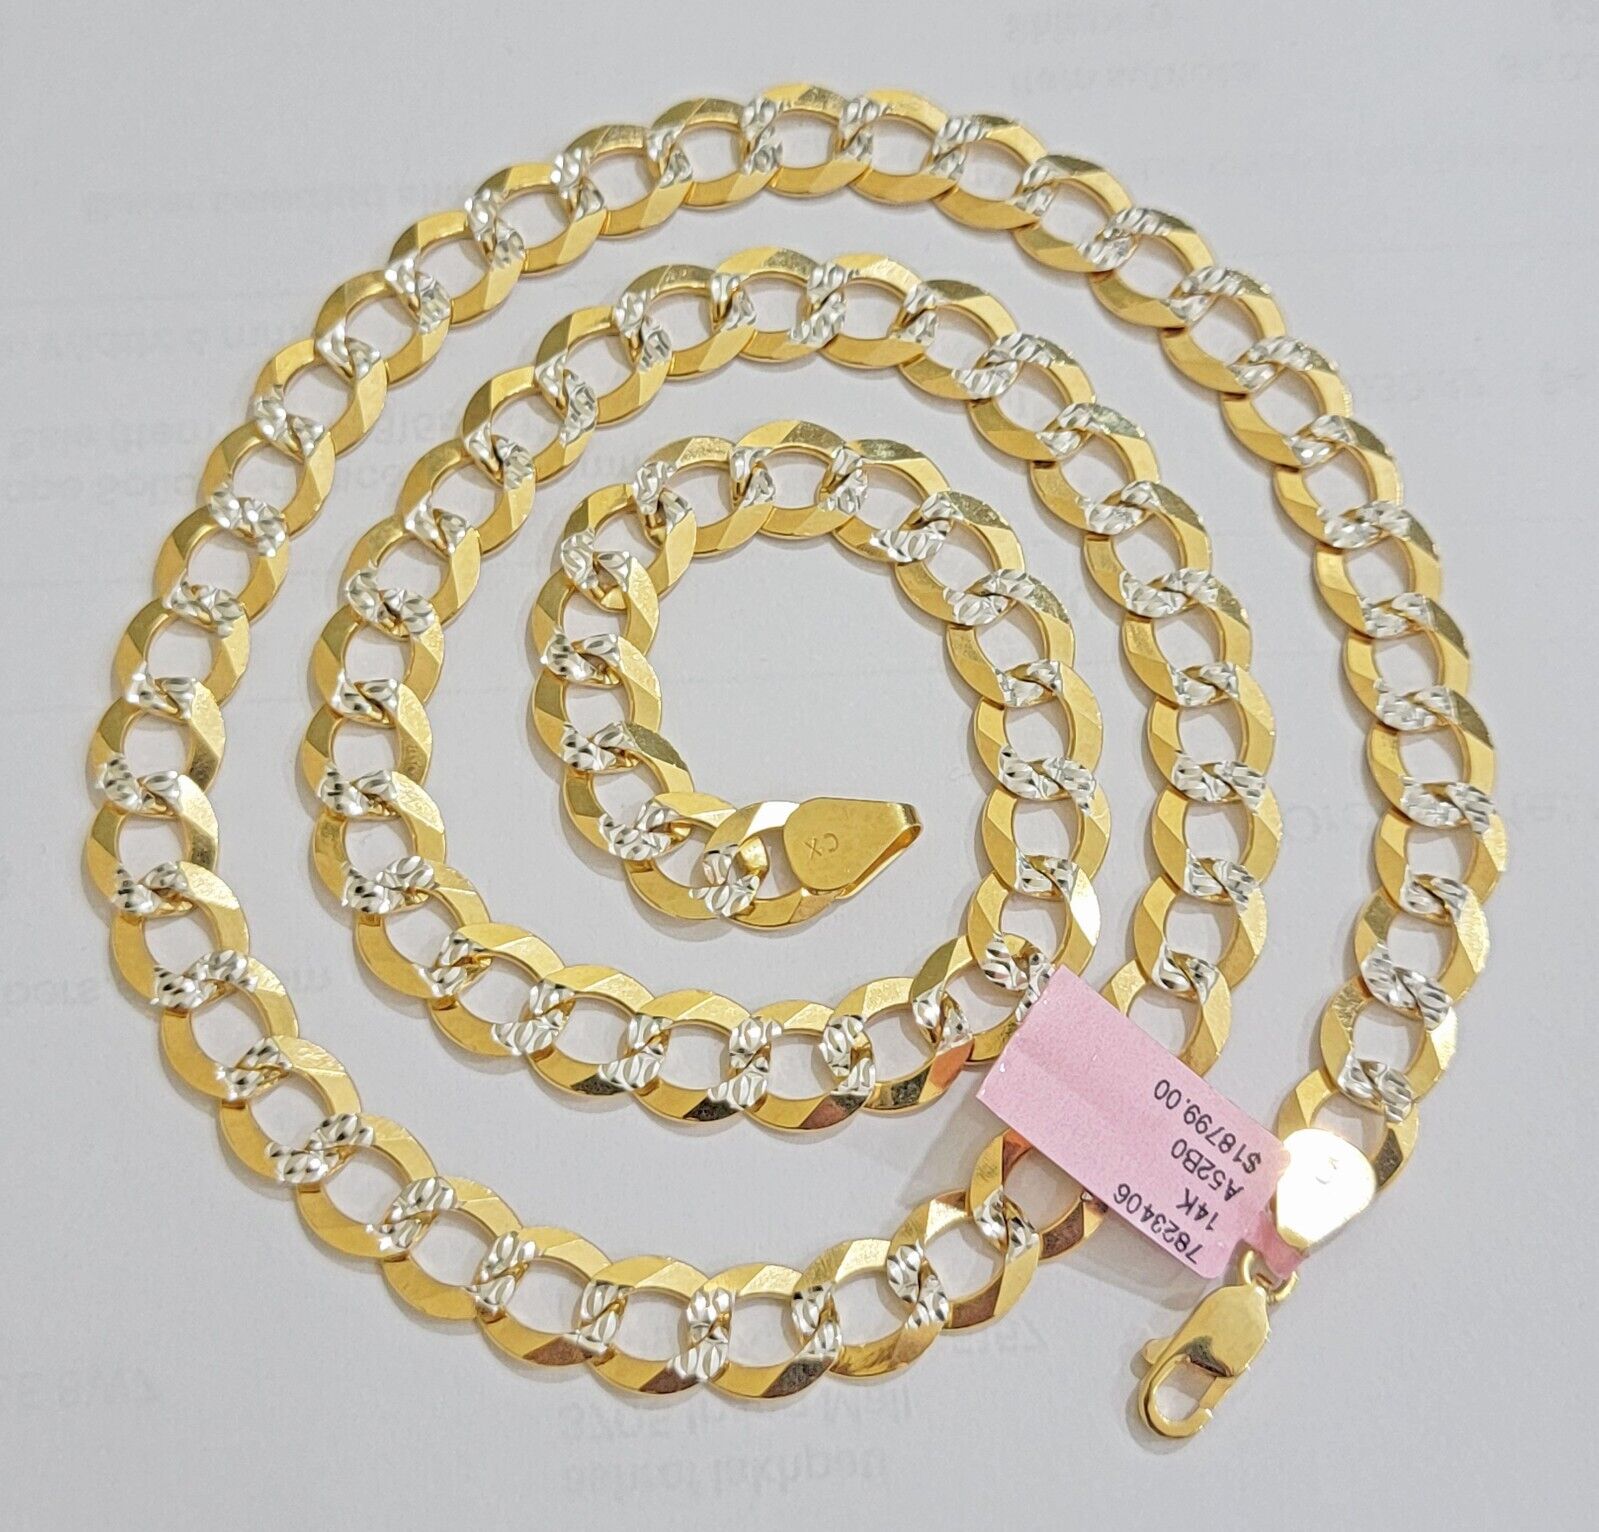 Solid 14k Gold Chain necklace Cuban Curb Link  9.5mm Two-Tone Diamond Cut 20-30